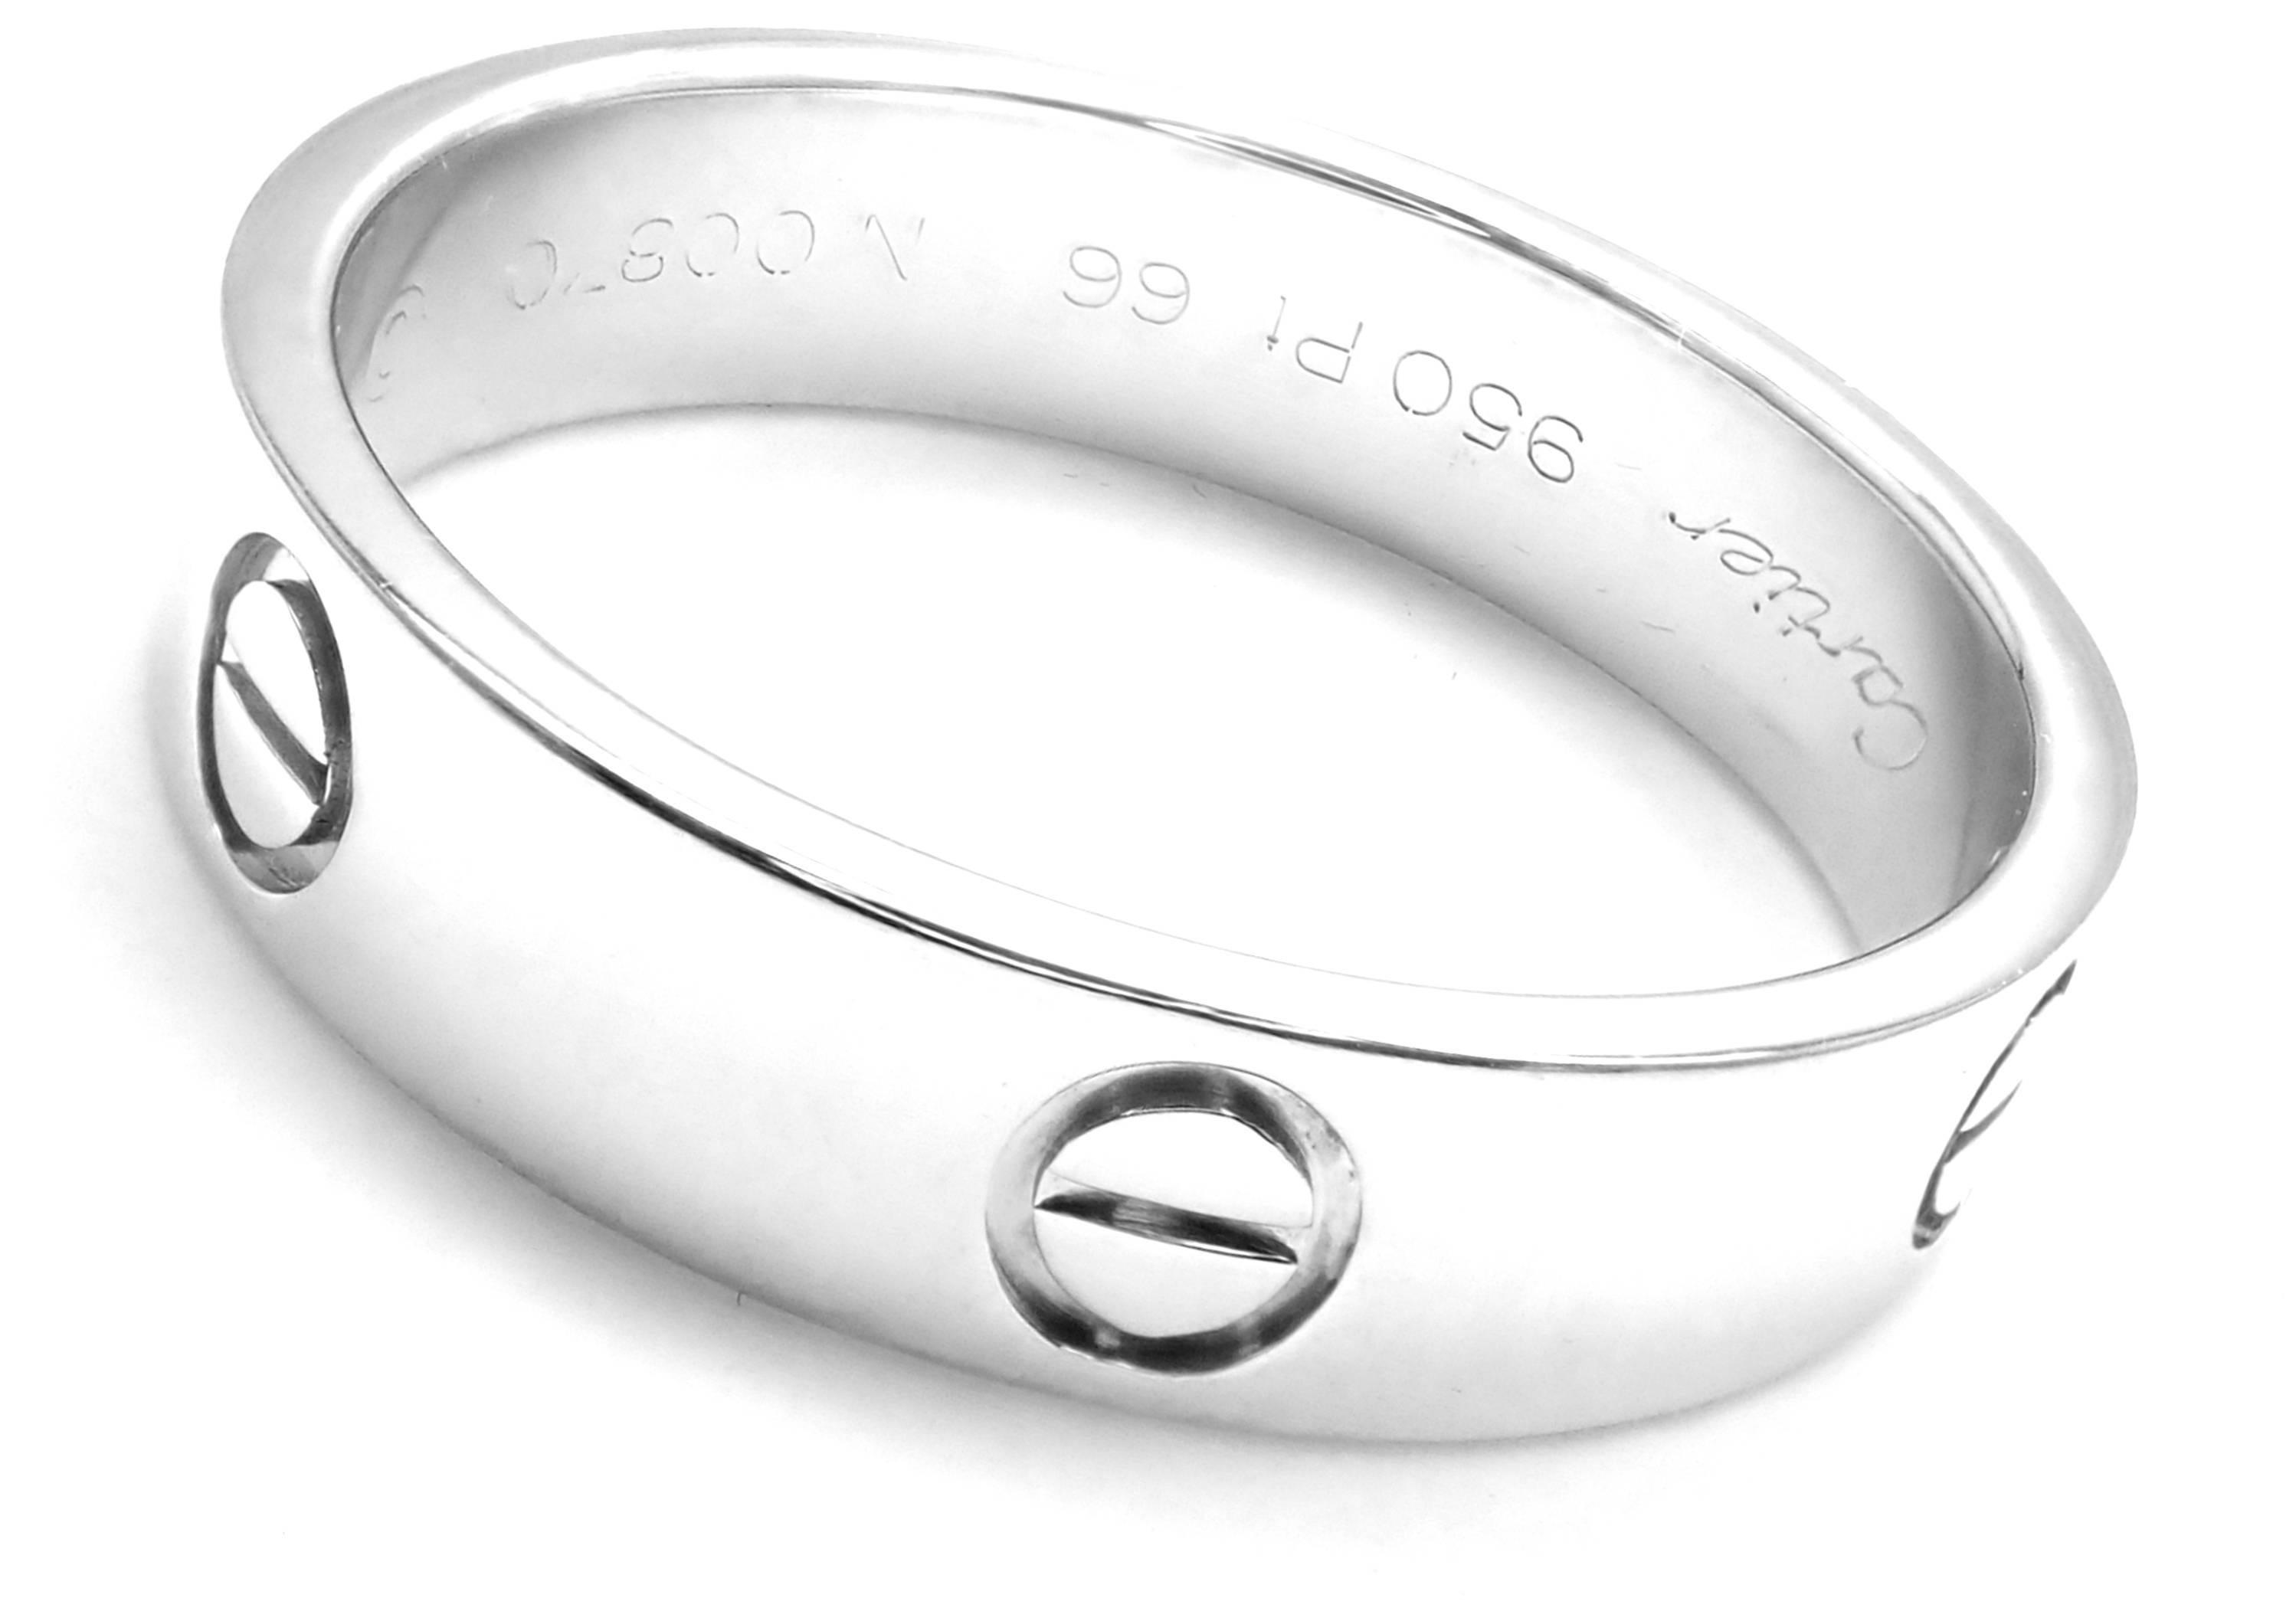 Platinum LOVE Band Ring by Cartier.  
This ring comes with Cartier Box.
Details: 
Band Width: 6mm 
Weight: 11.2 grams
Ring Size: European 66 US 11.5
Stamped Hallmarks: Cartier 950pt 66 N00870 2001 French Hallmarks

*Free Shipping within the United